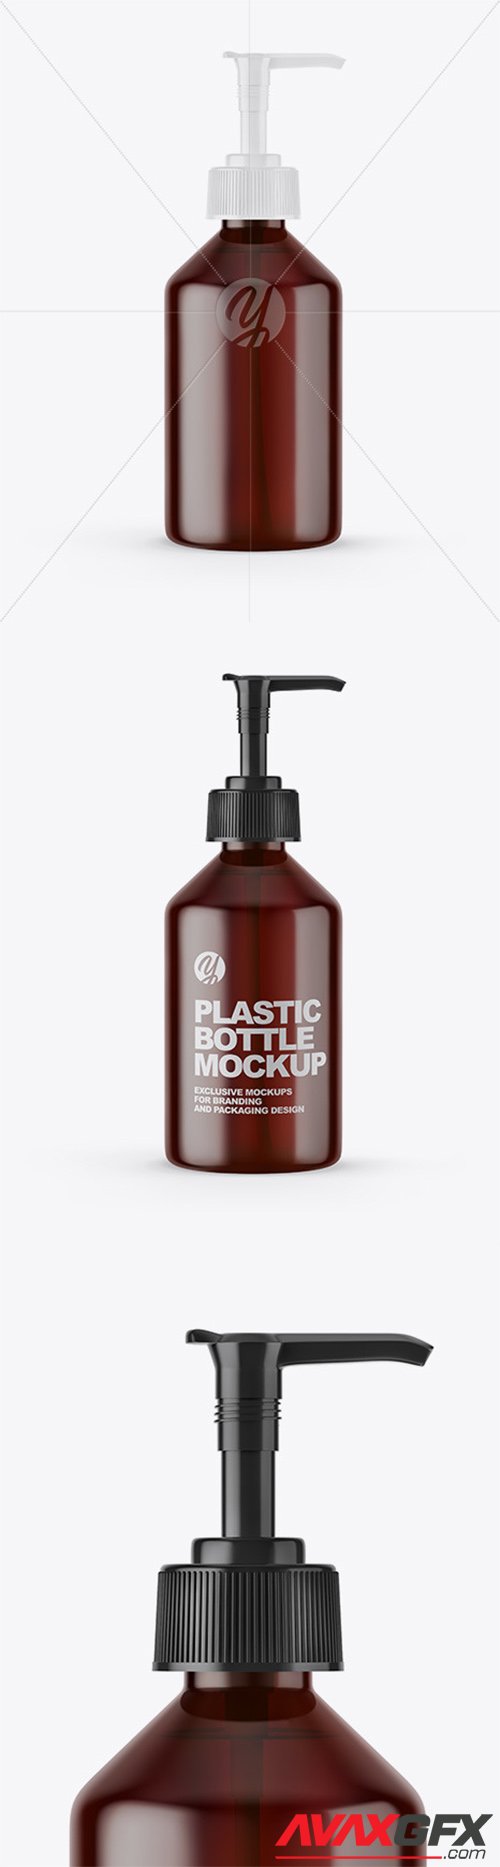 Amber Cosmetic Bottle with Pump Mockup 66442